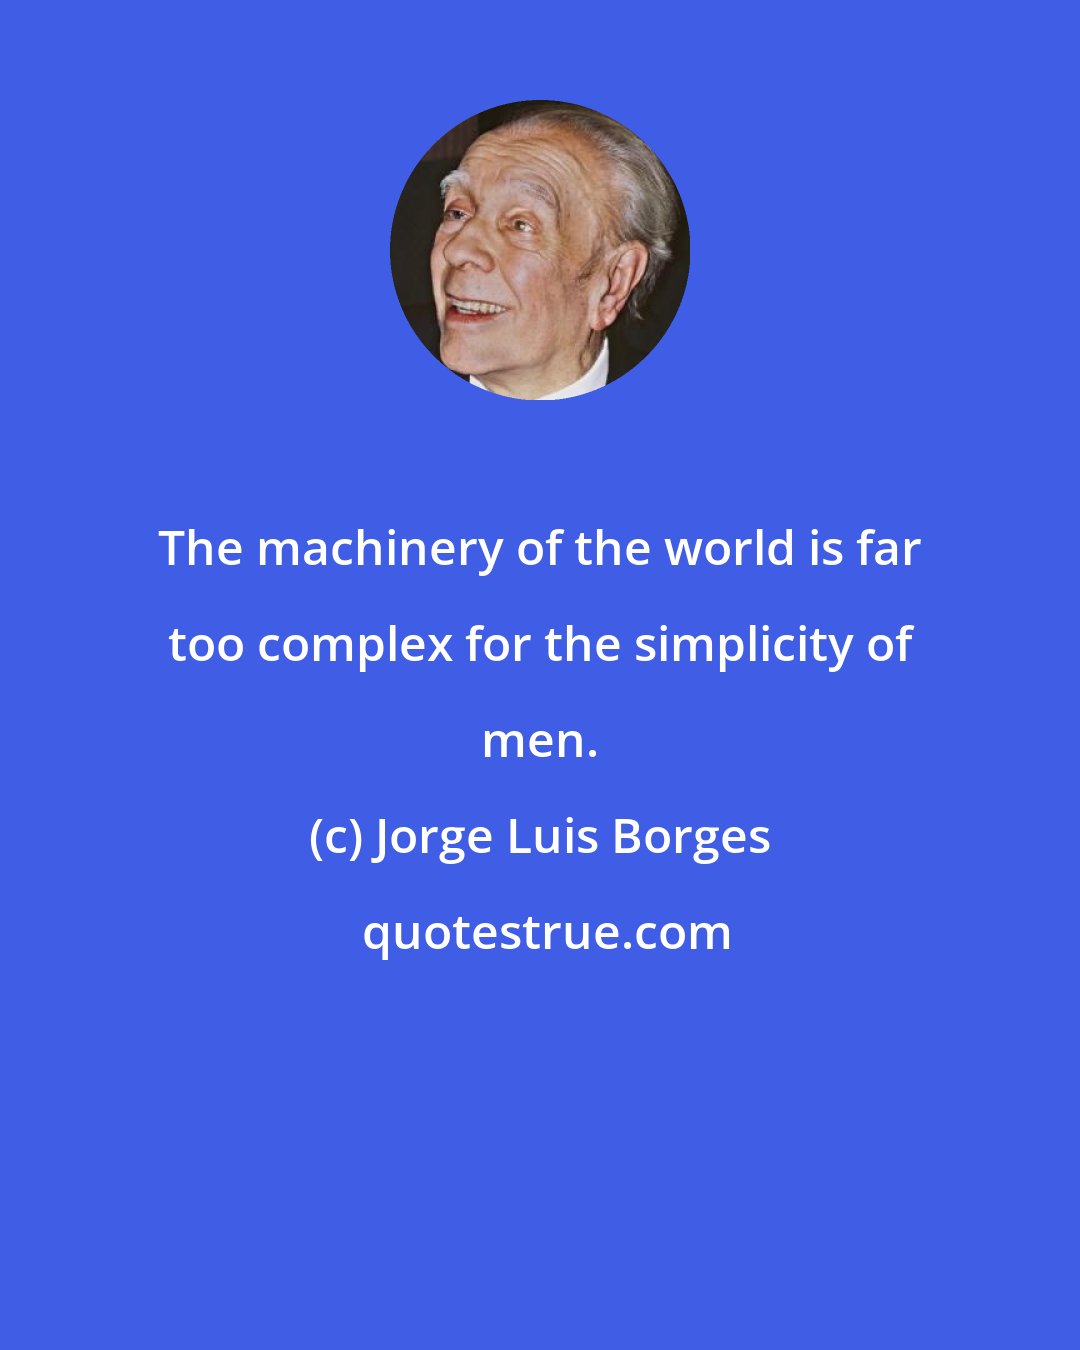 Jorge Luis Borges: The machinery of the world is far too complex for the simplicity of men.